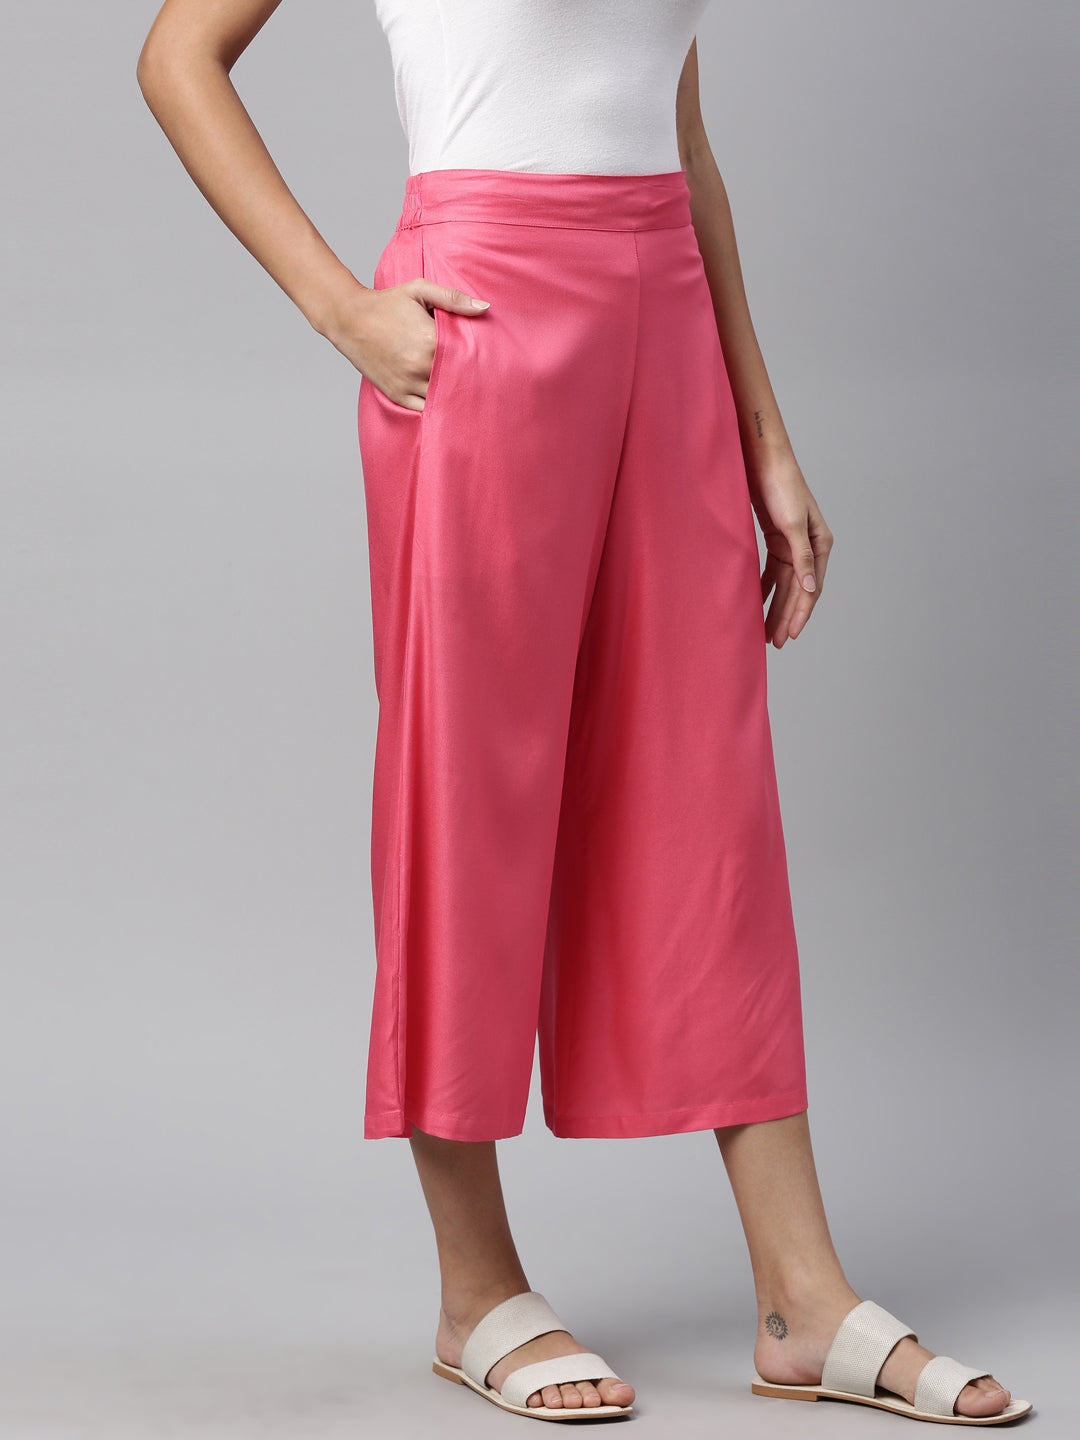 FLARE PANT SOLID TROUSERS - SOFT RAYON FABRIC